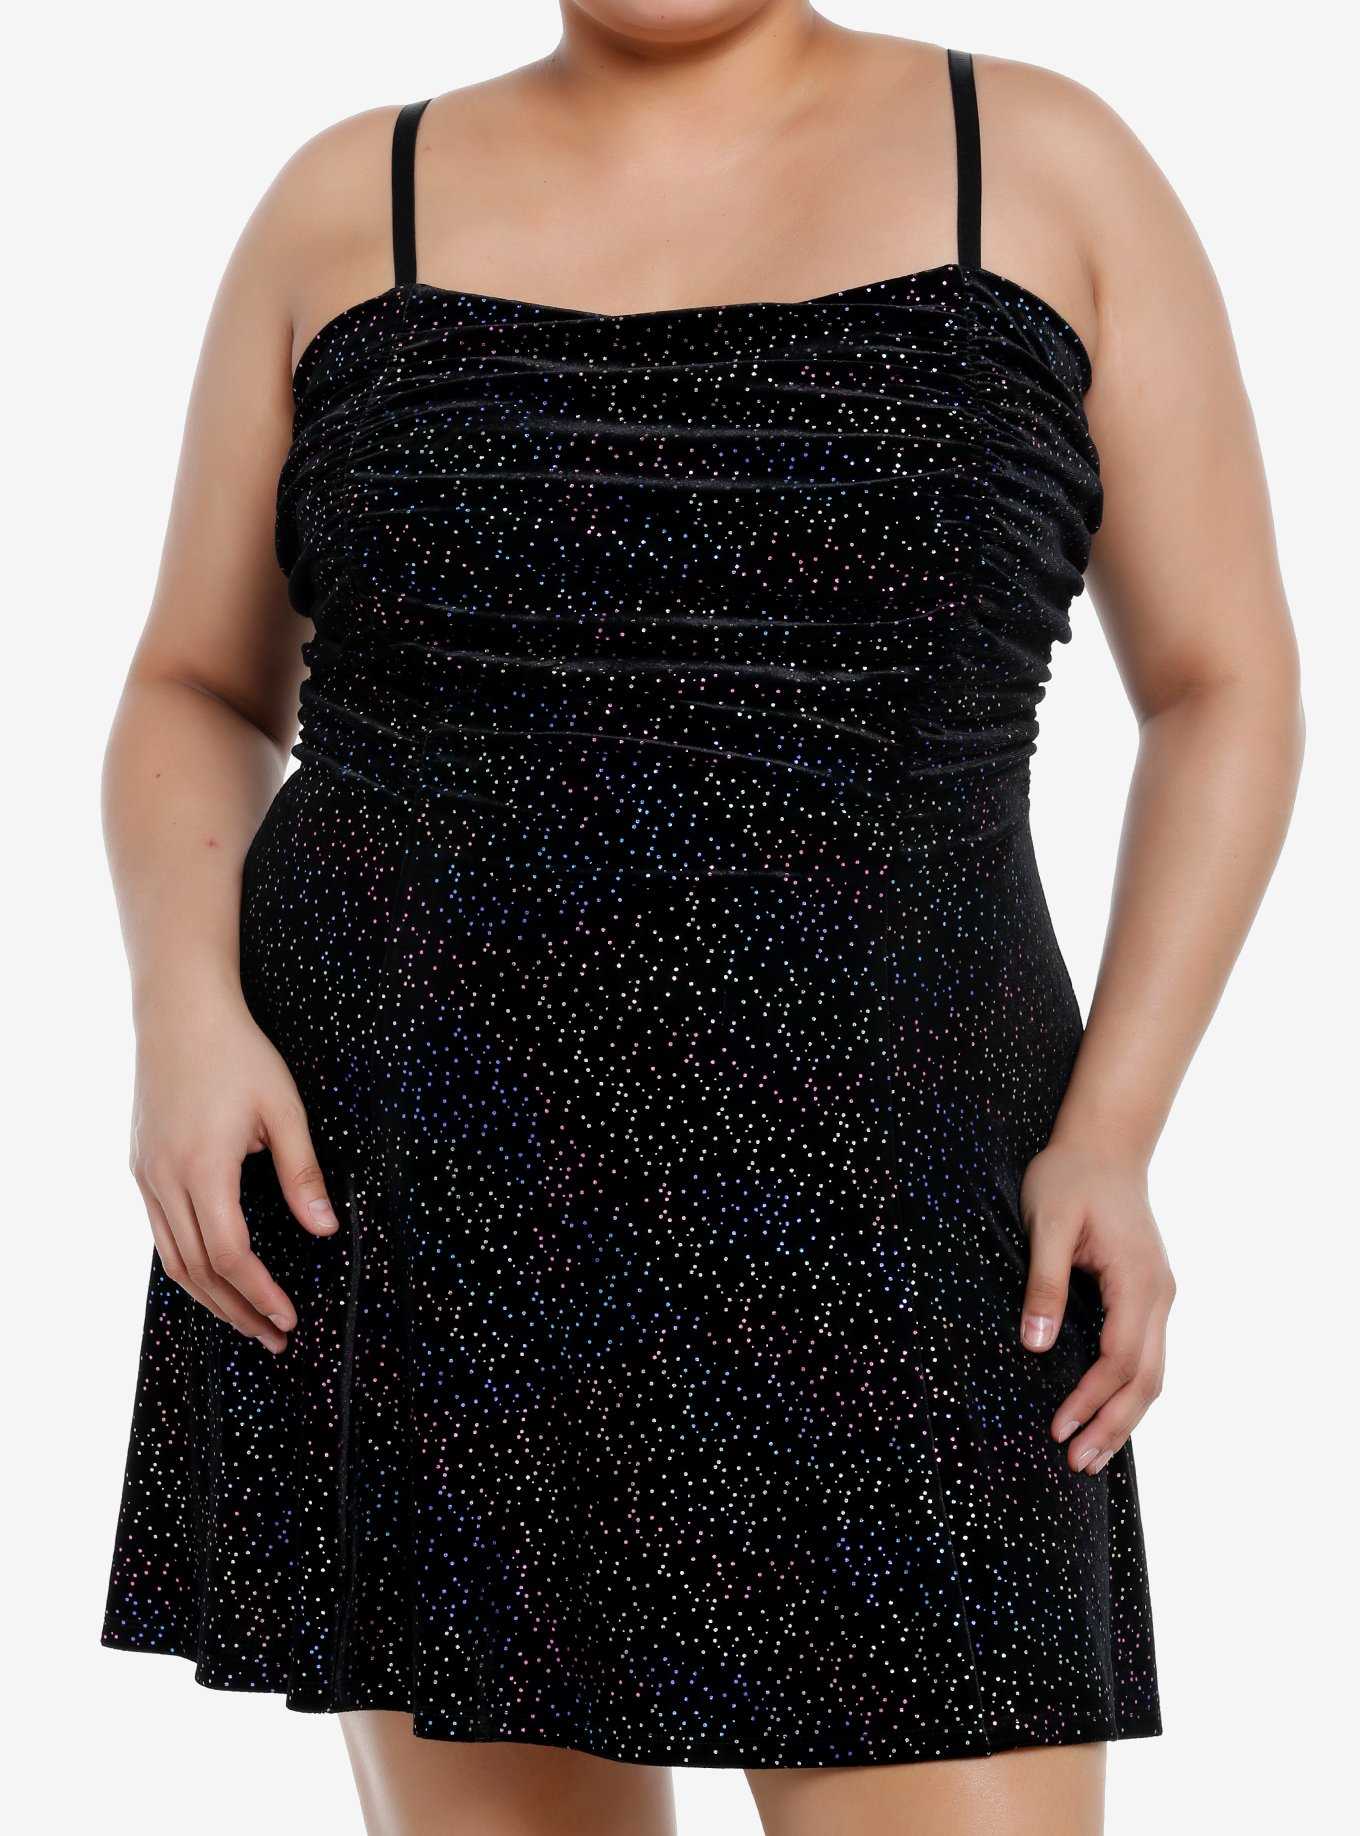 Hot Topic Black Lace Tiered Strapless Dress Plus